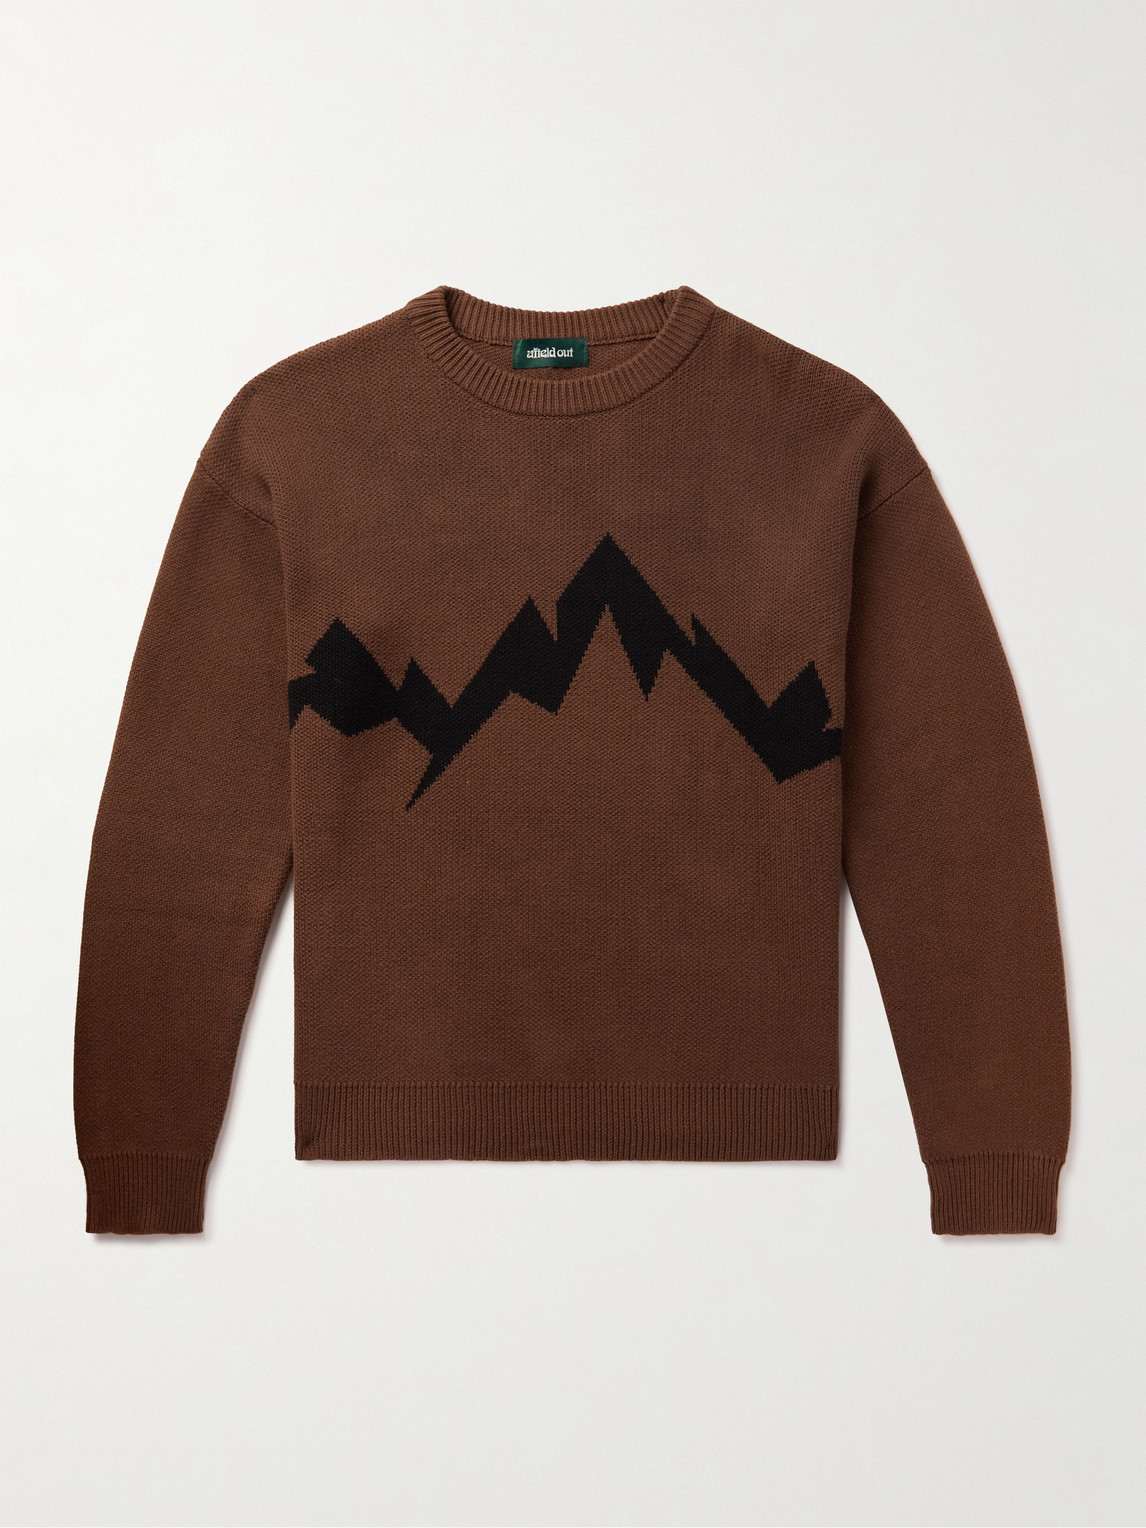 Afield Out Lowell Intarsia Cotton Sweater In Brown